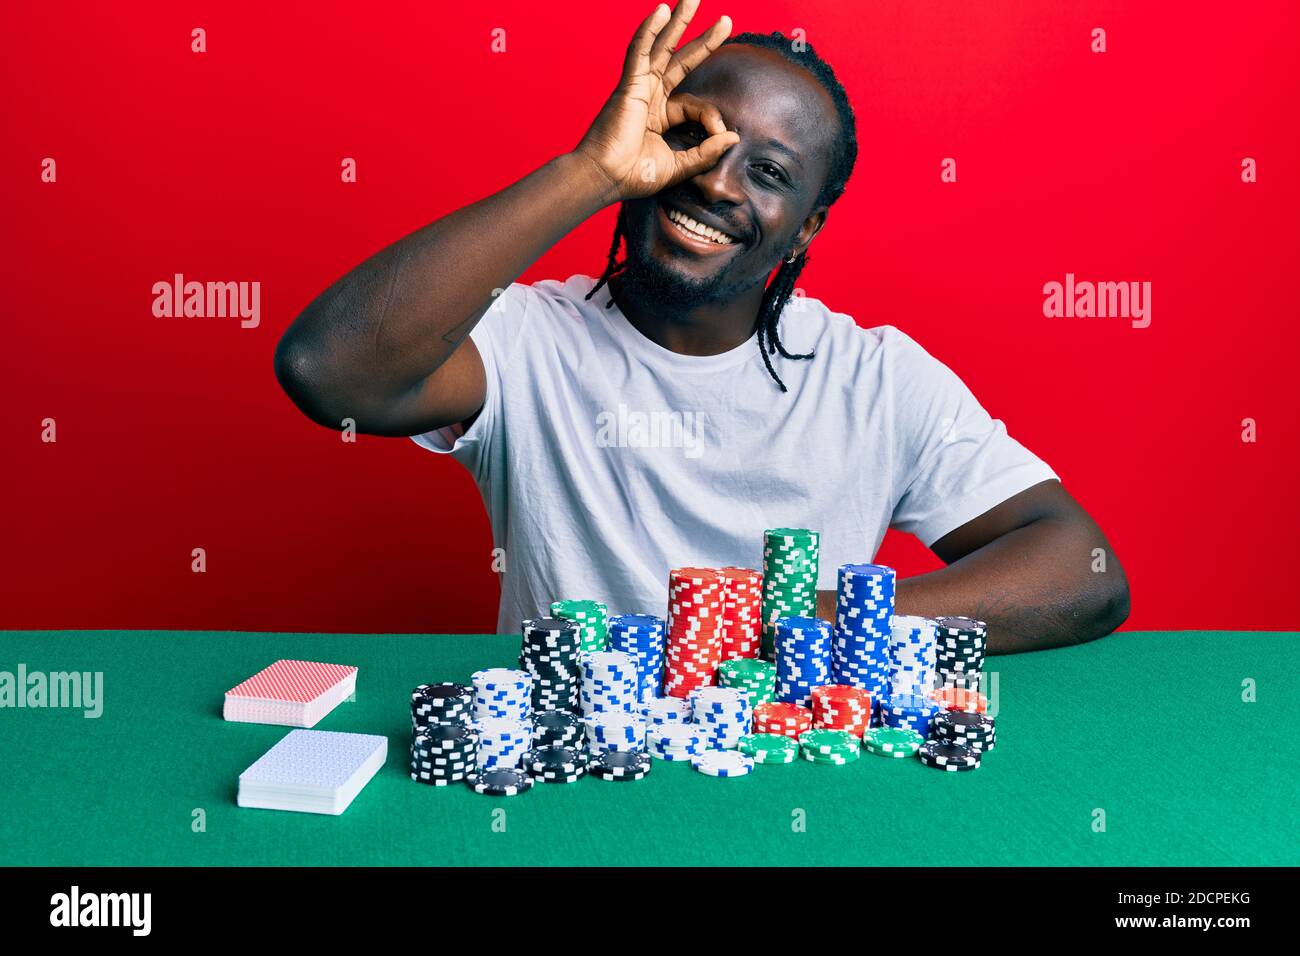 young black man sitting on the table with poker chips and cards smiling happy doing ok sign with hand on eye looking through fingers Stock Photo - Alamy